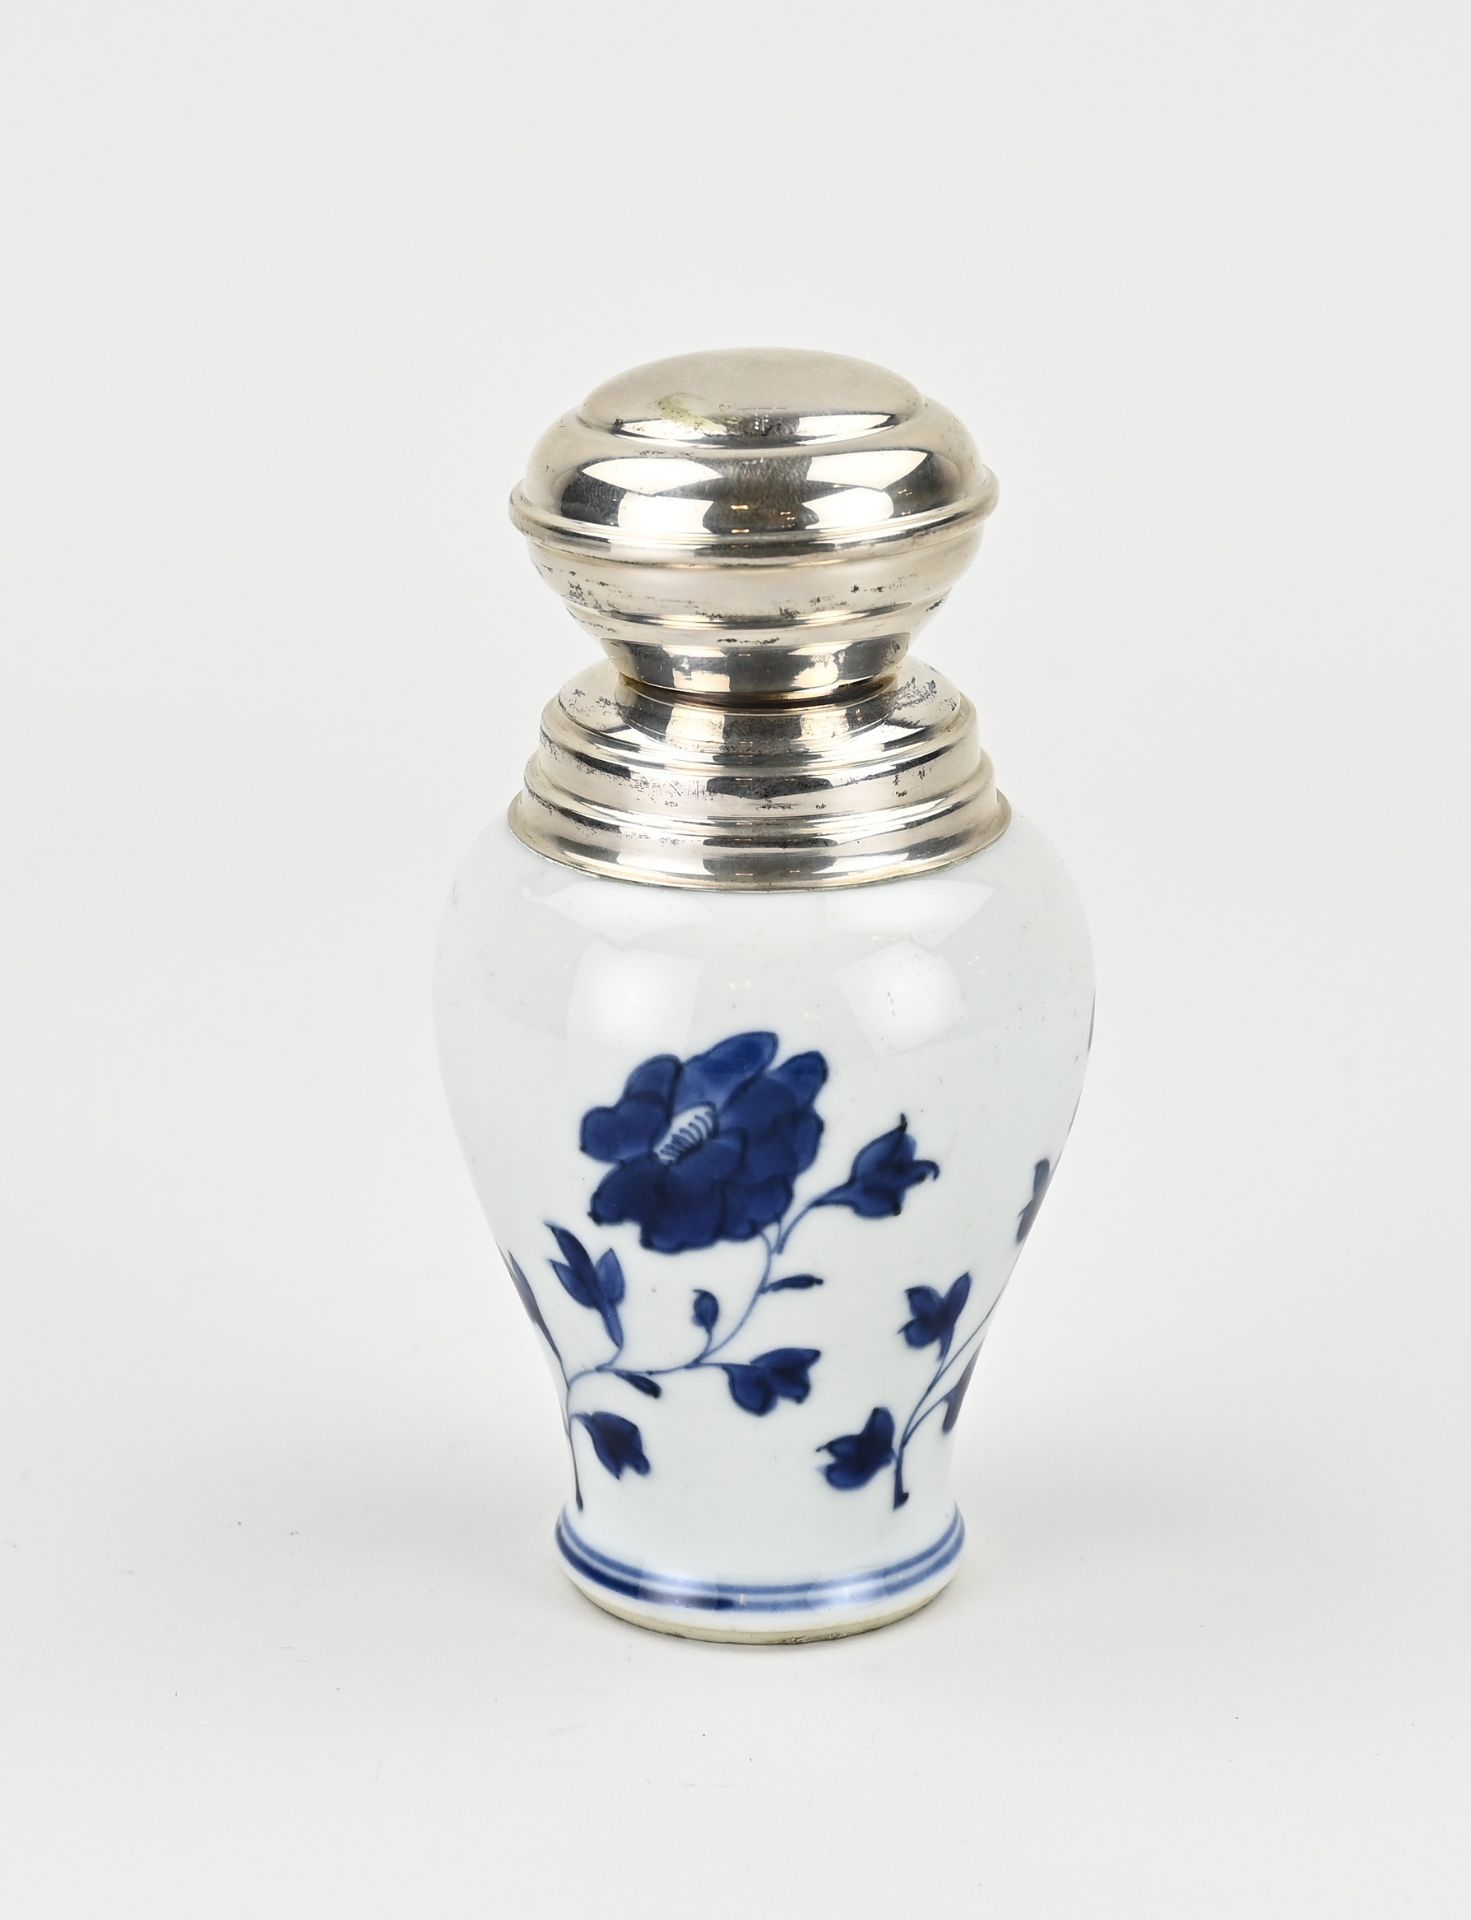 18th century Chinese tea caddy with silver cap, H 13 cm.